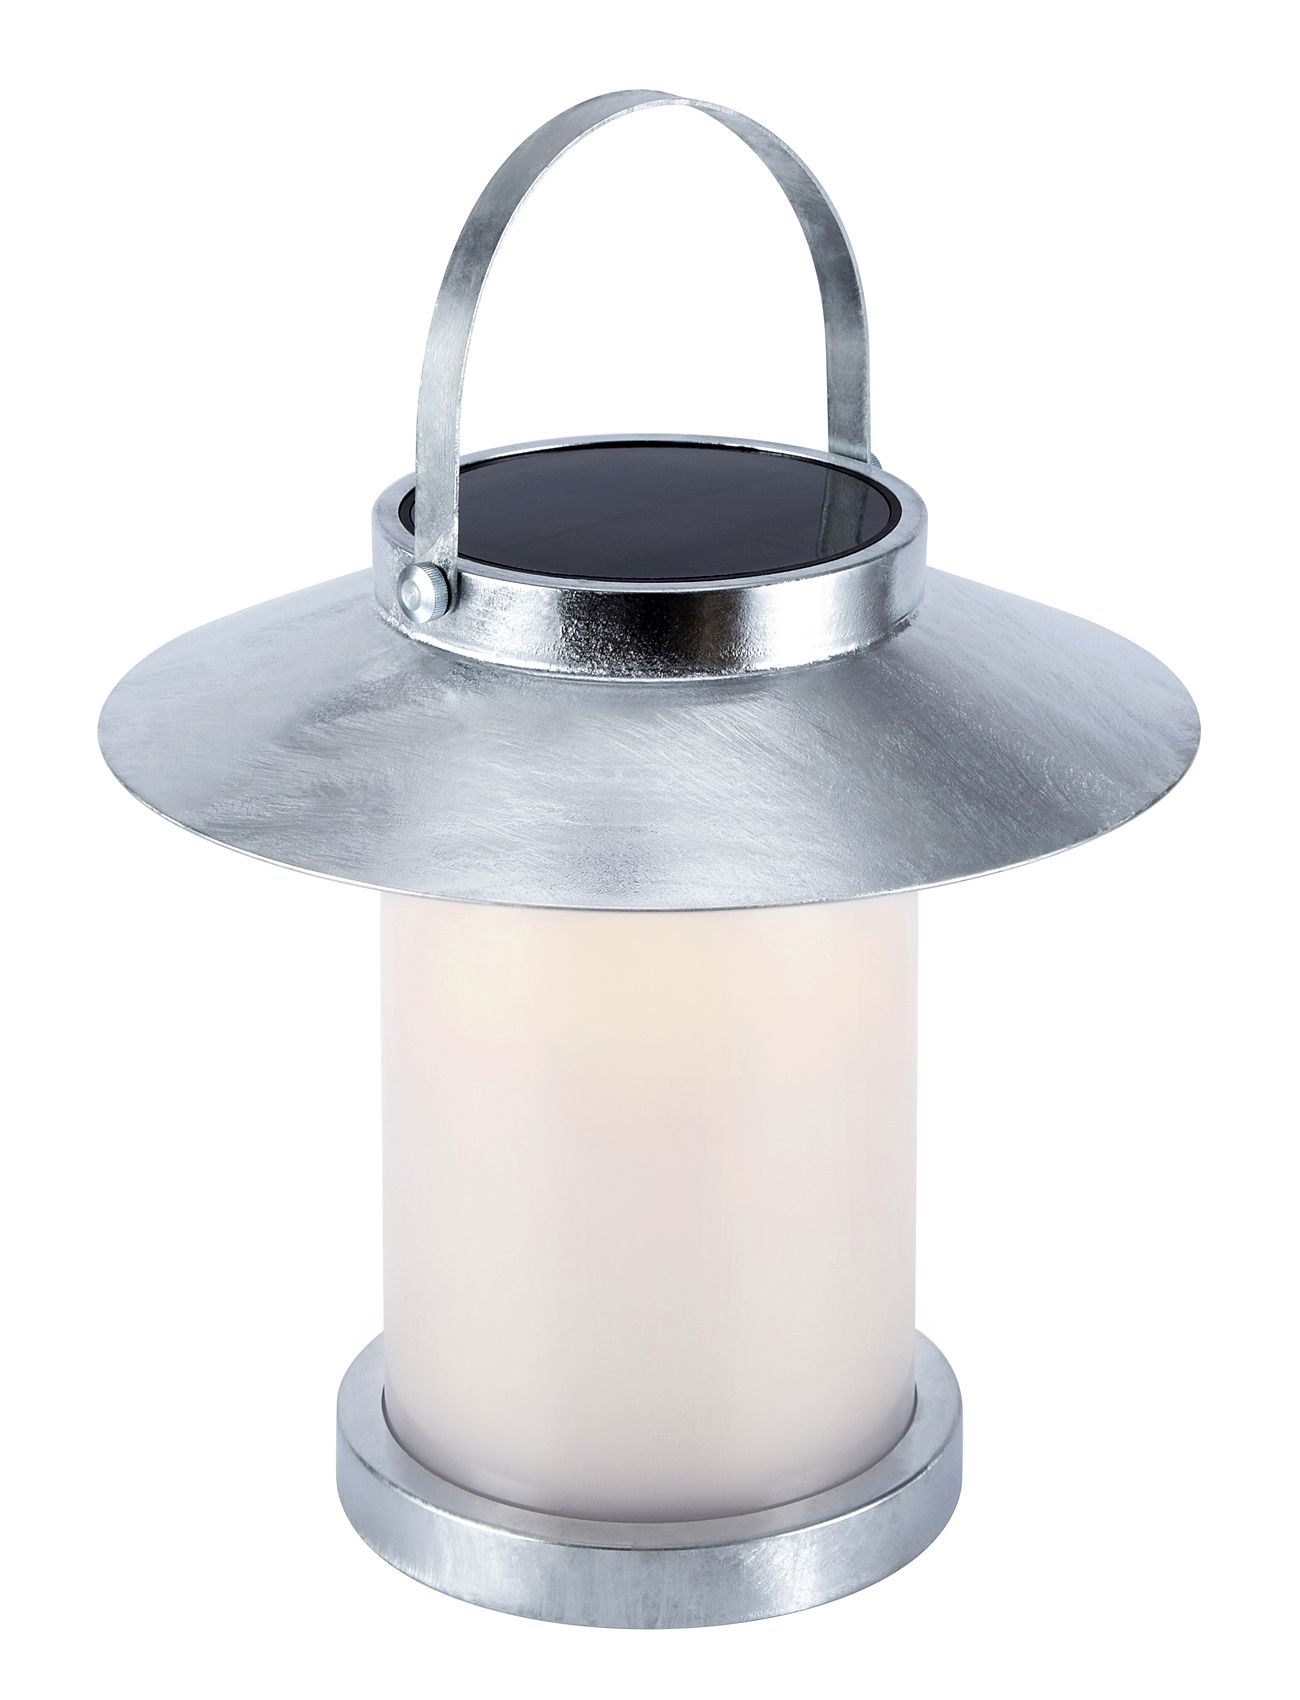 Temple To-Go 35| Batterilampe | Home Lighting Lamps Ceiling Lamps Silver Nordlux